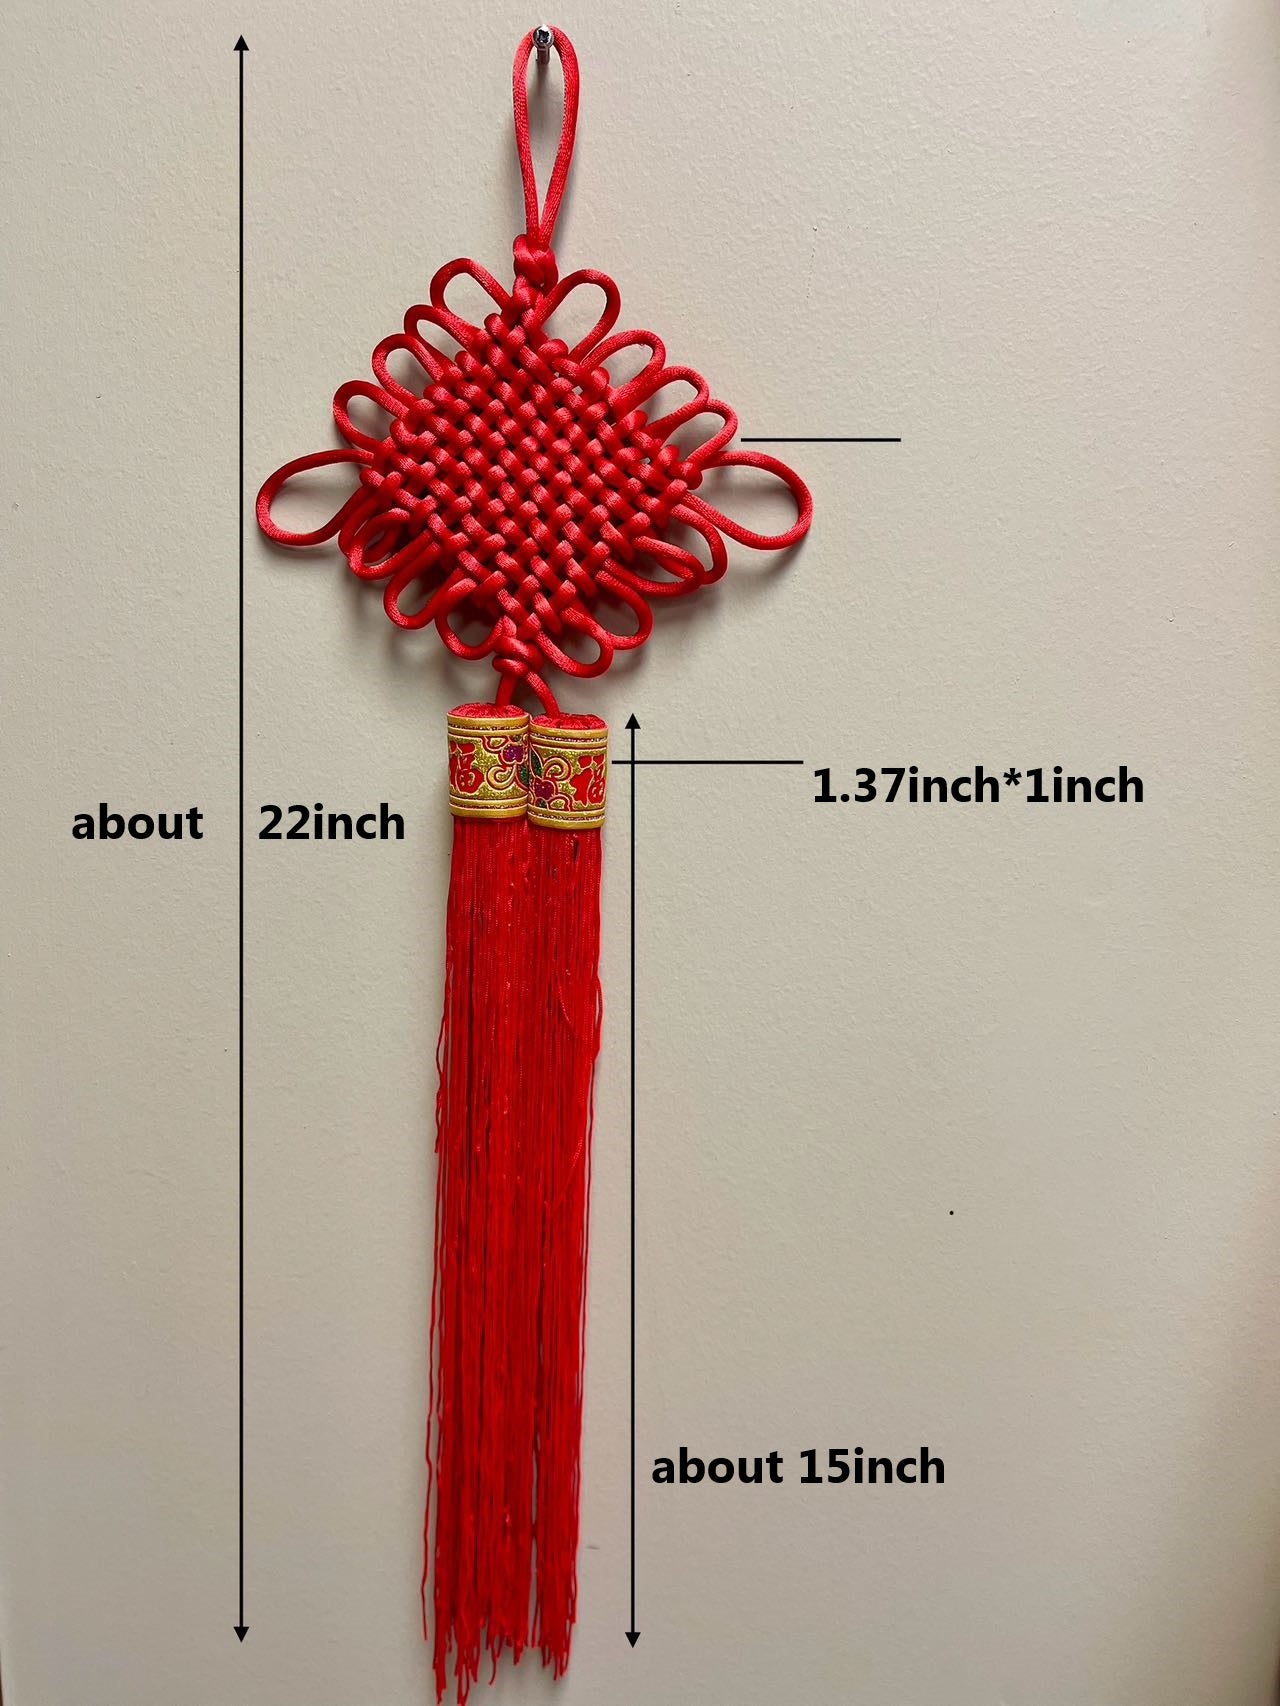 Chinese Knot, Chinese Lunar New Year Decorations, For Home Pendant Hanging Chinese Oriental Good Luck Wealth Charms, Chinese Knot Decoration Spring Festival, Red Tassel Ears Gift